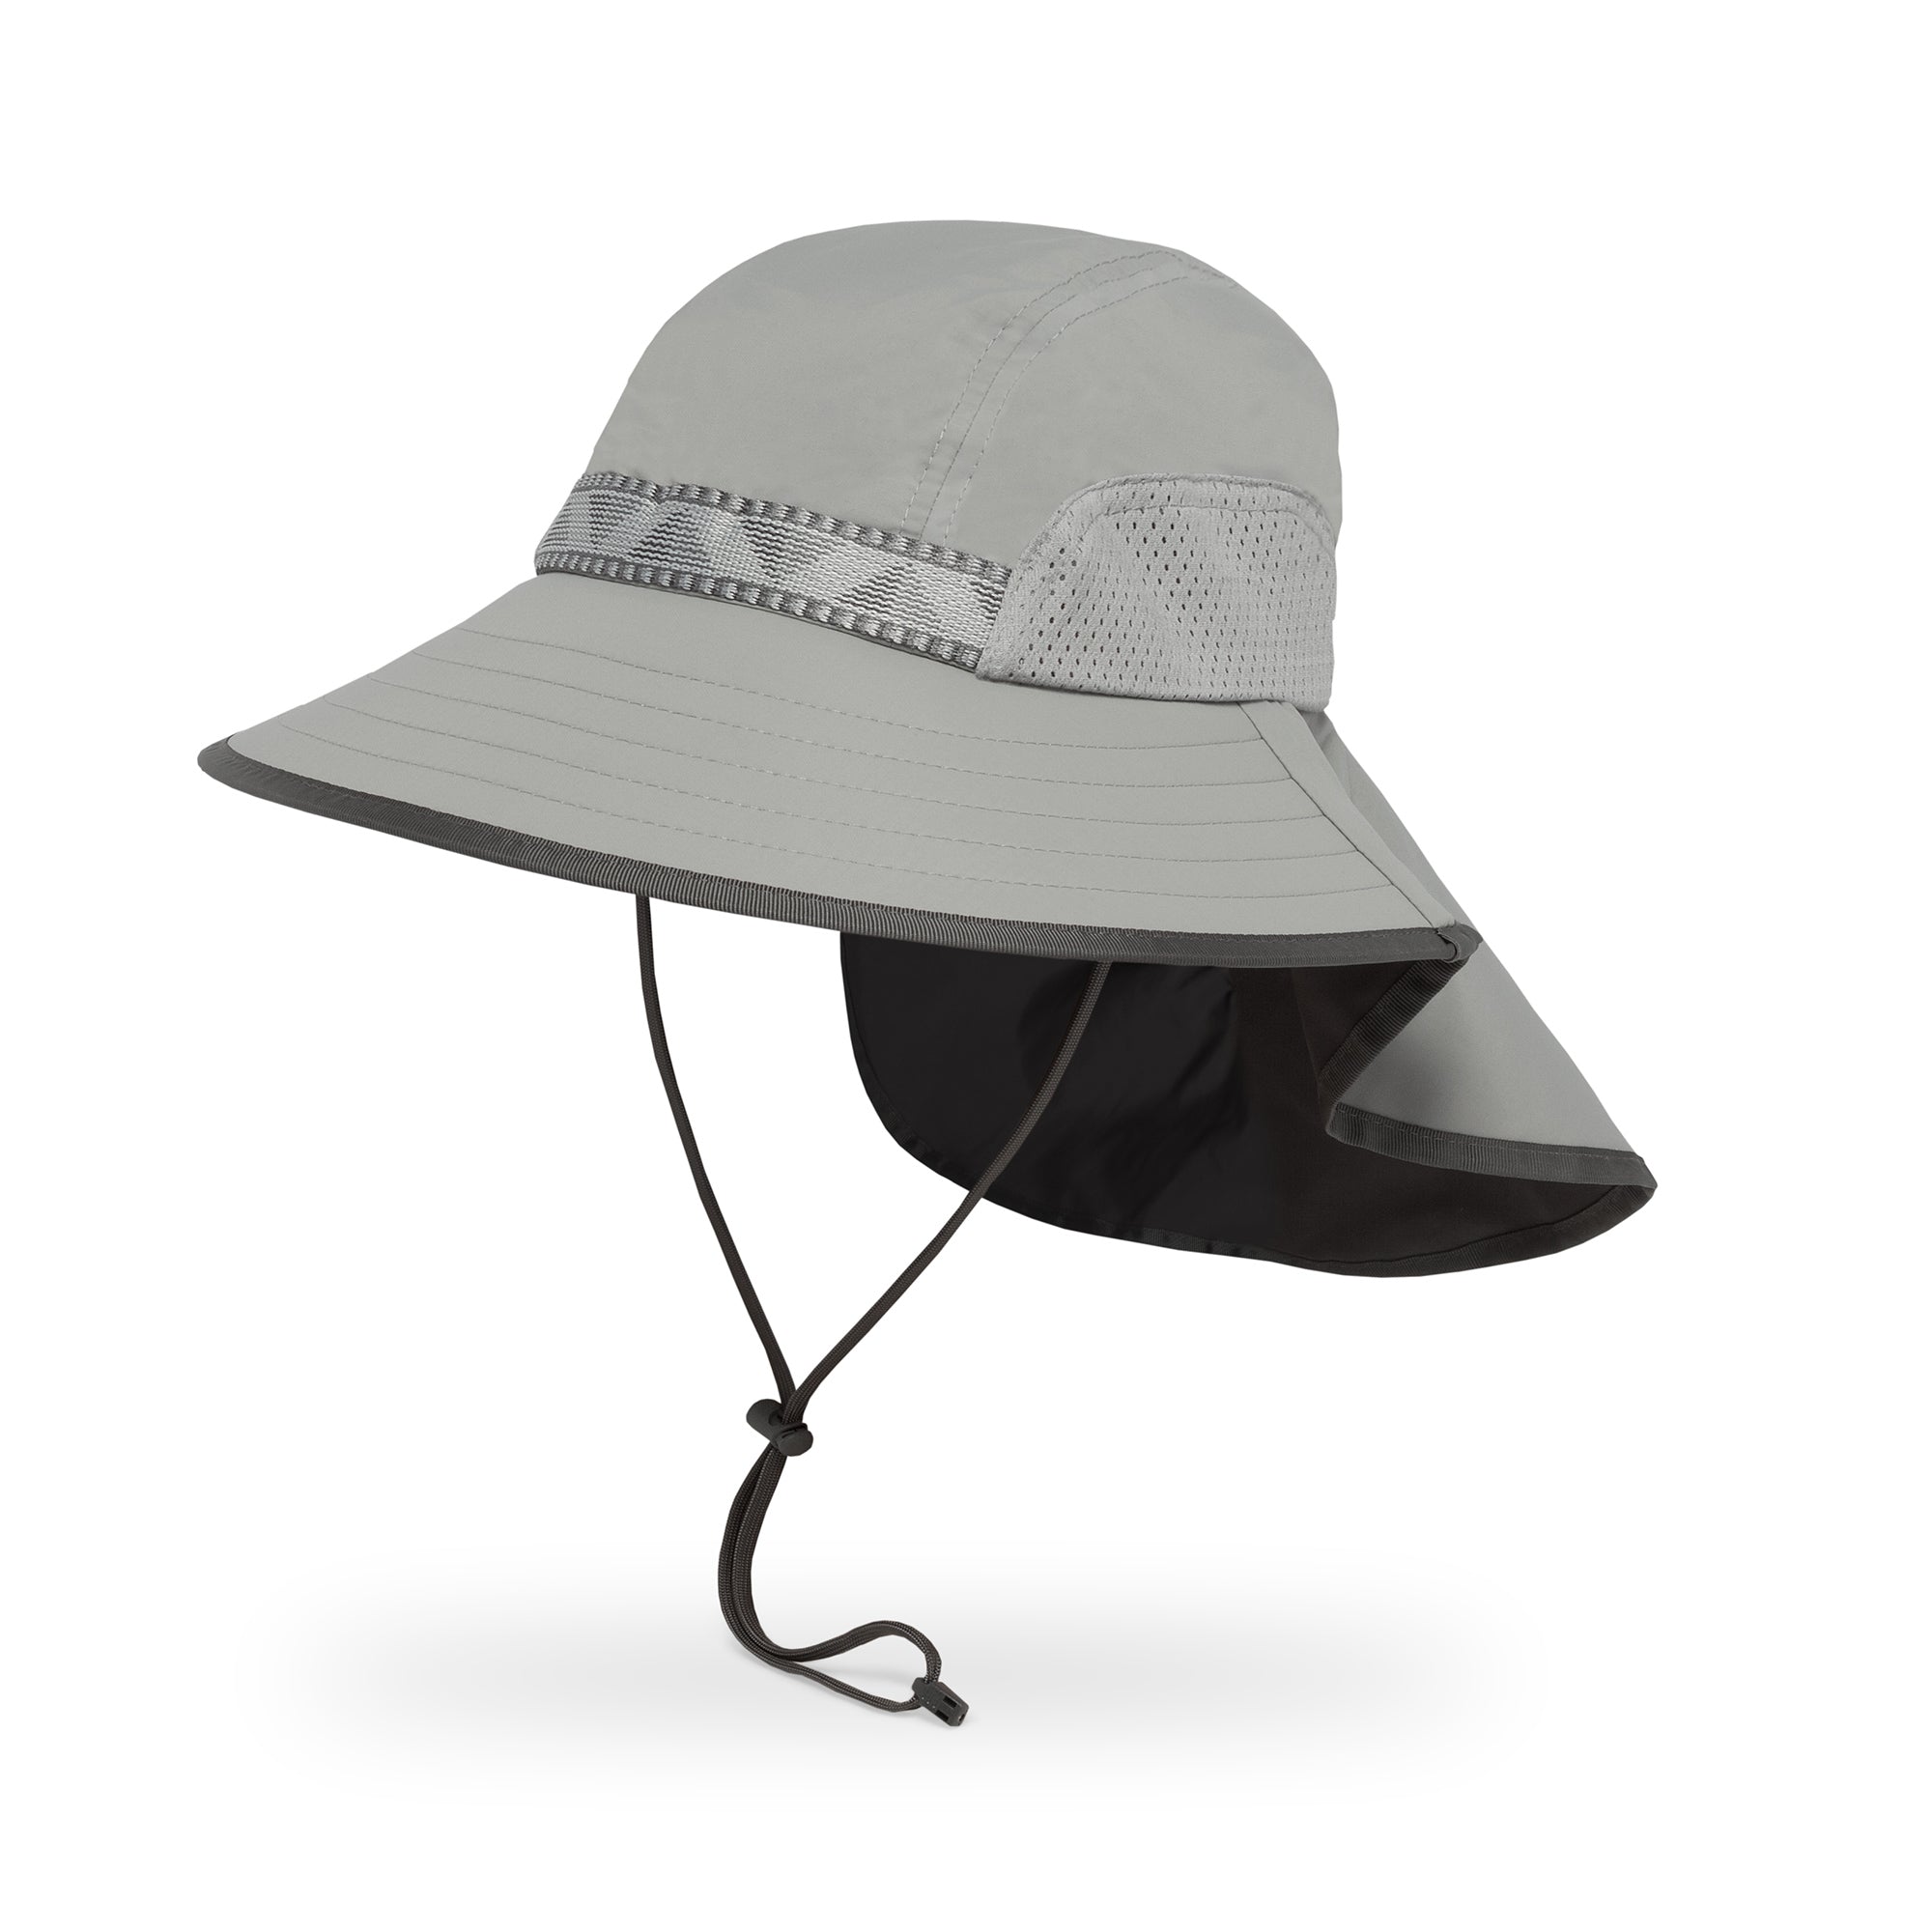 Sunday Afternoons Adventure Hat (Quarry, S/M)